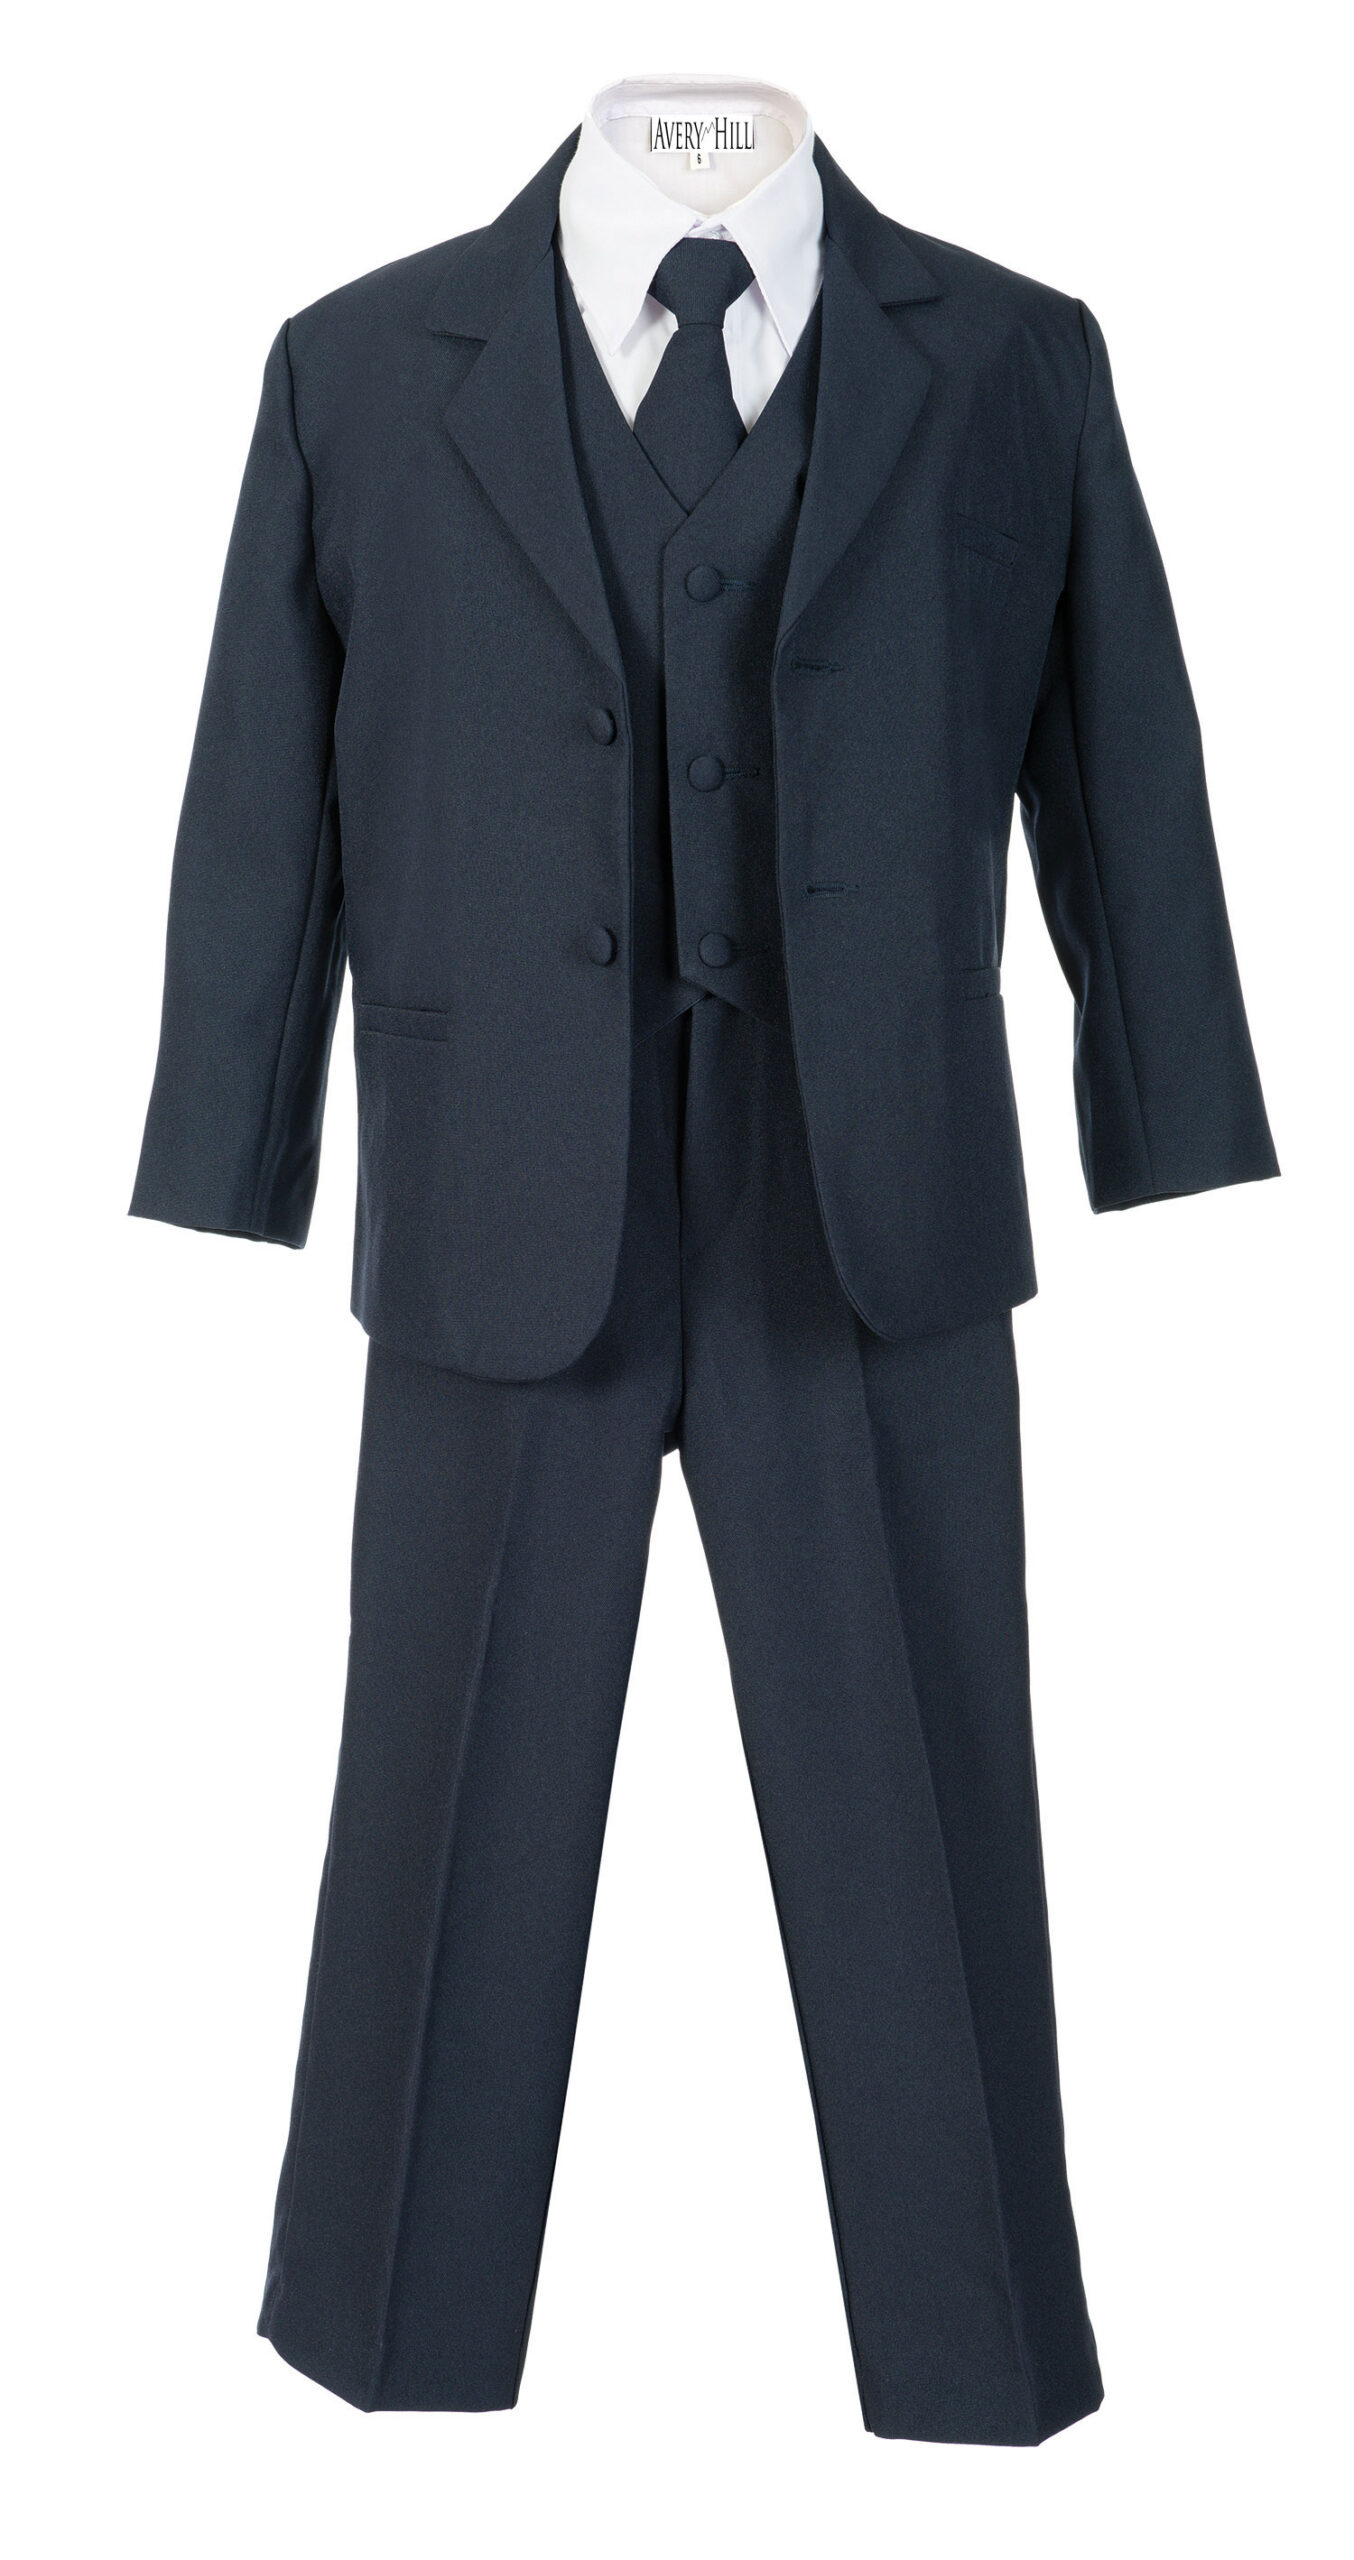 Avery Hill Boys Formal 5 Piece Suit with Shirt and Vest Navy - 6